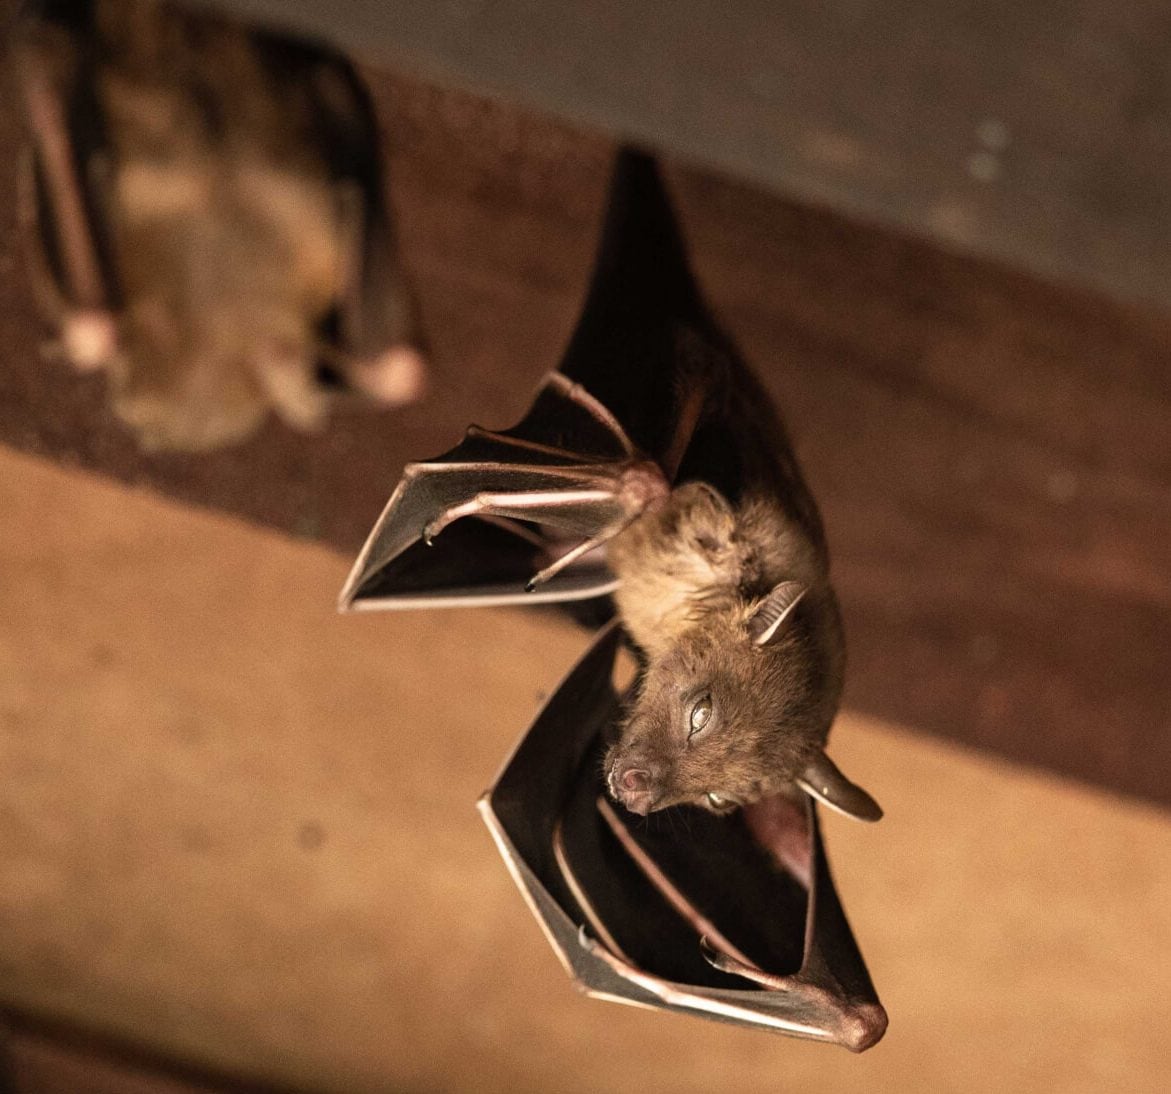 Expert bat removal services for a safe and humane solution in Flushing